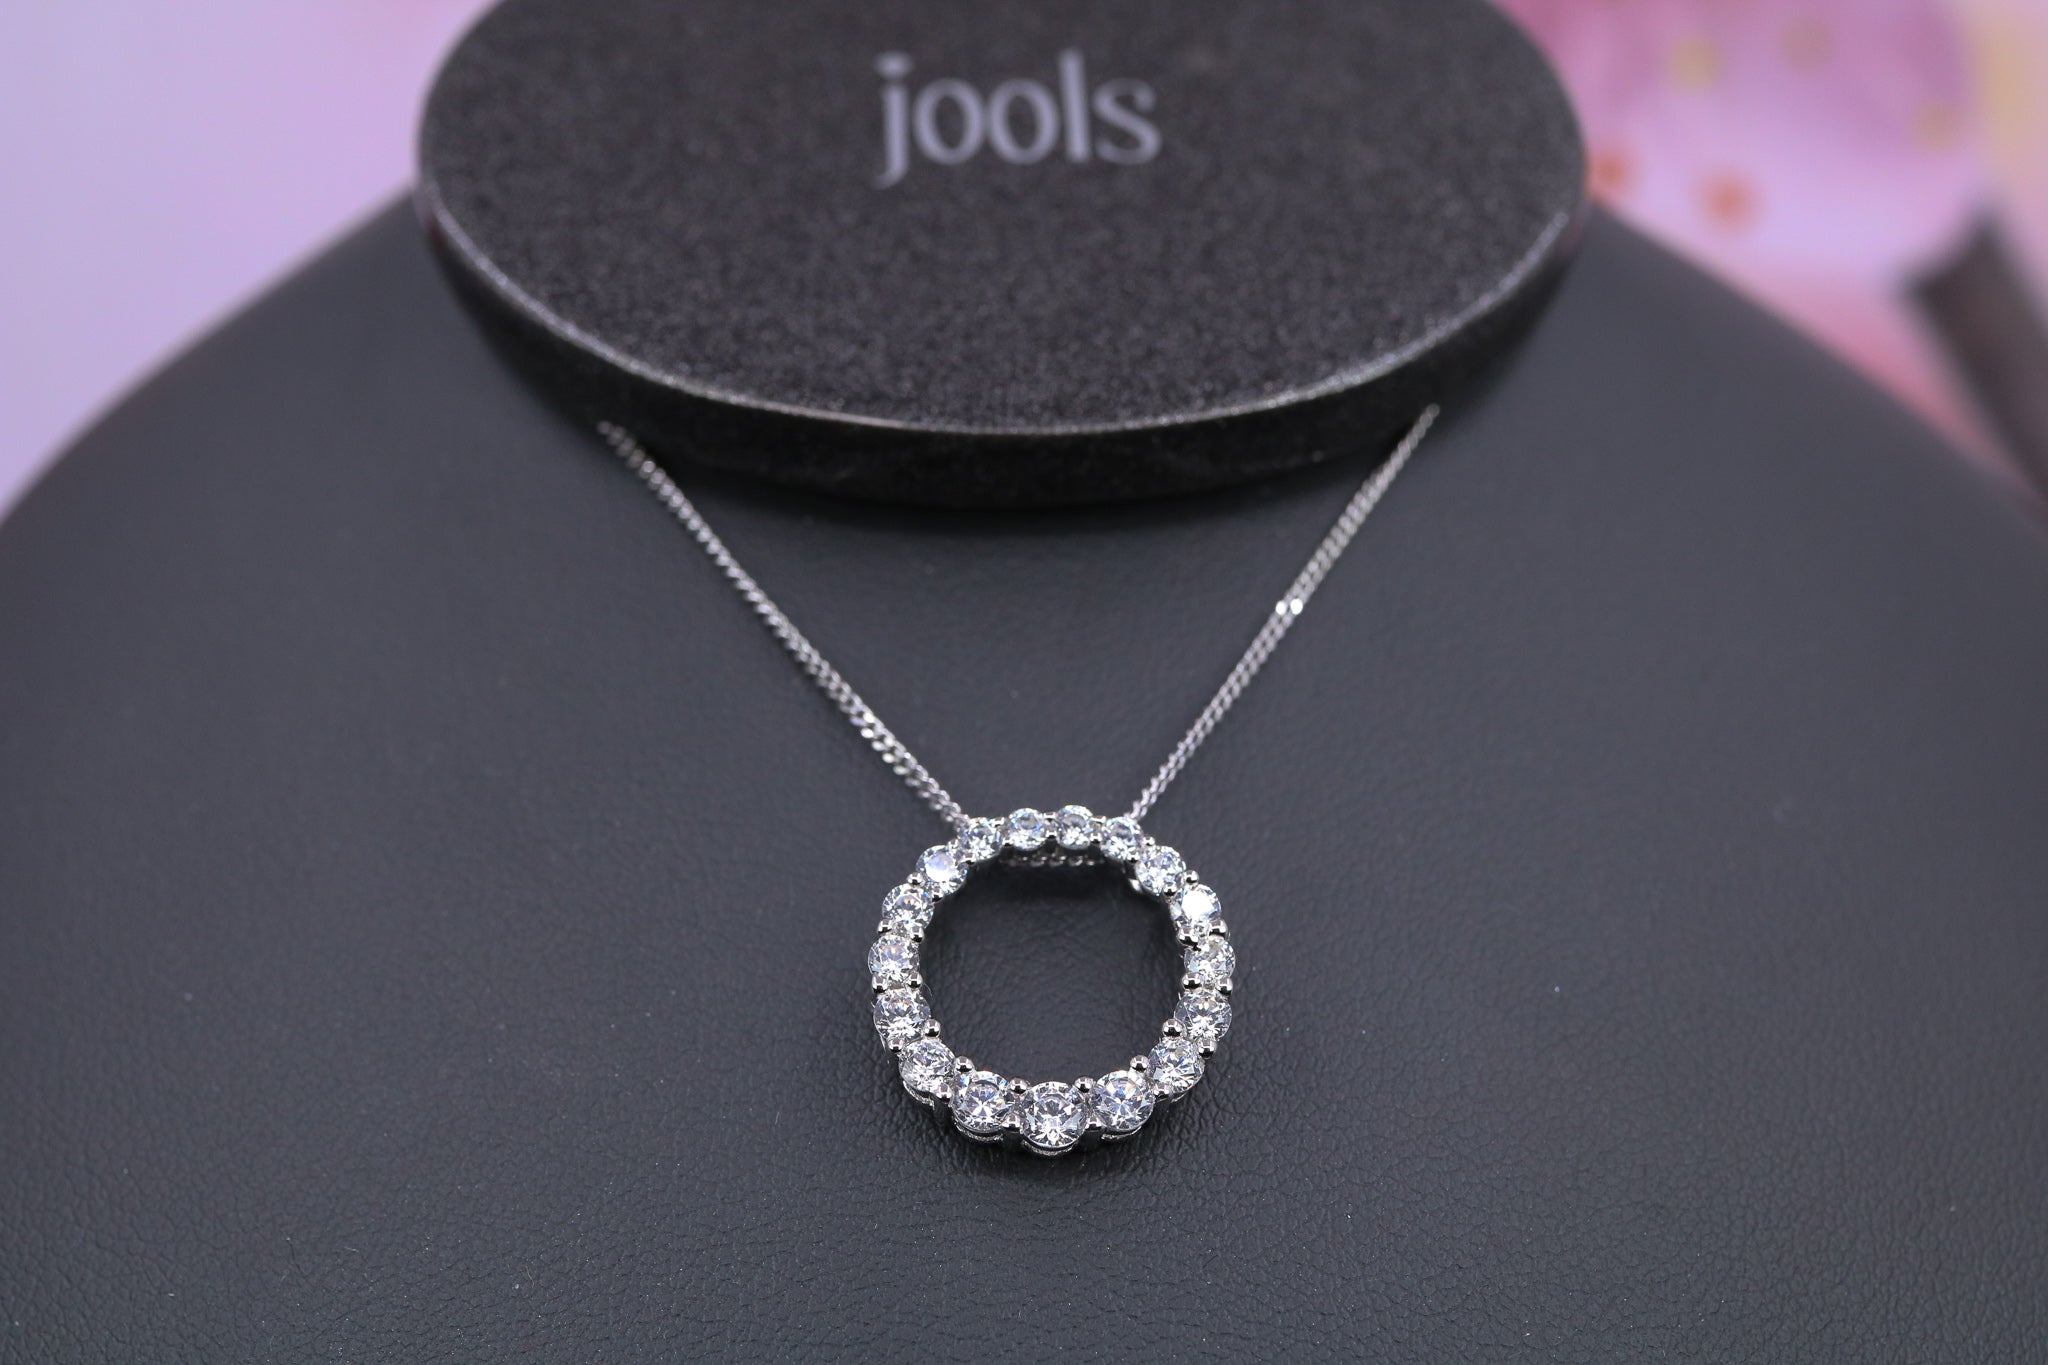 Jools Sterling Silver Pendant & Chain - JL1004 - Hallmark Jewellers Formby & The Jewellers Bench Widnes